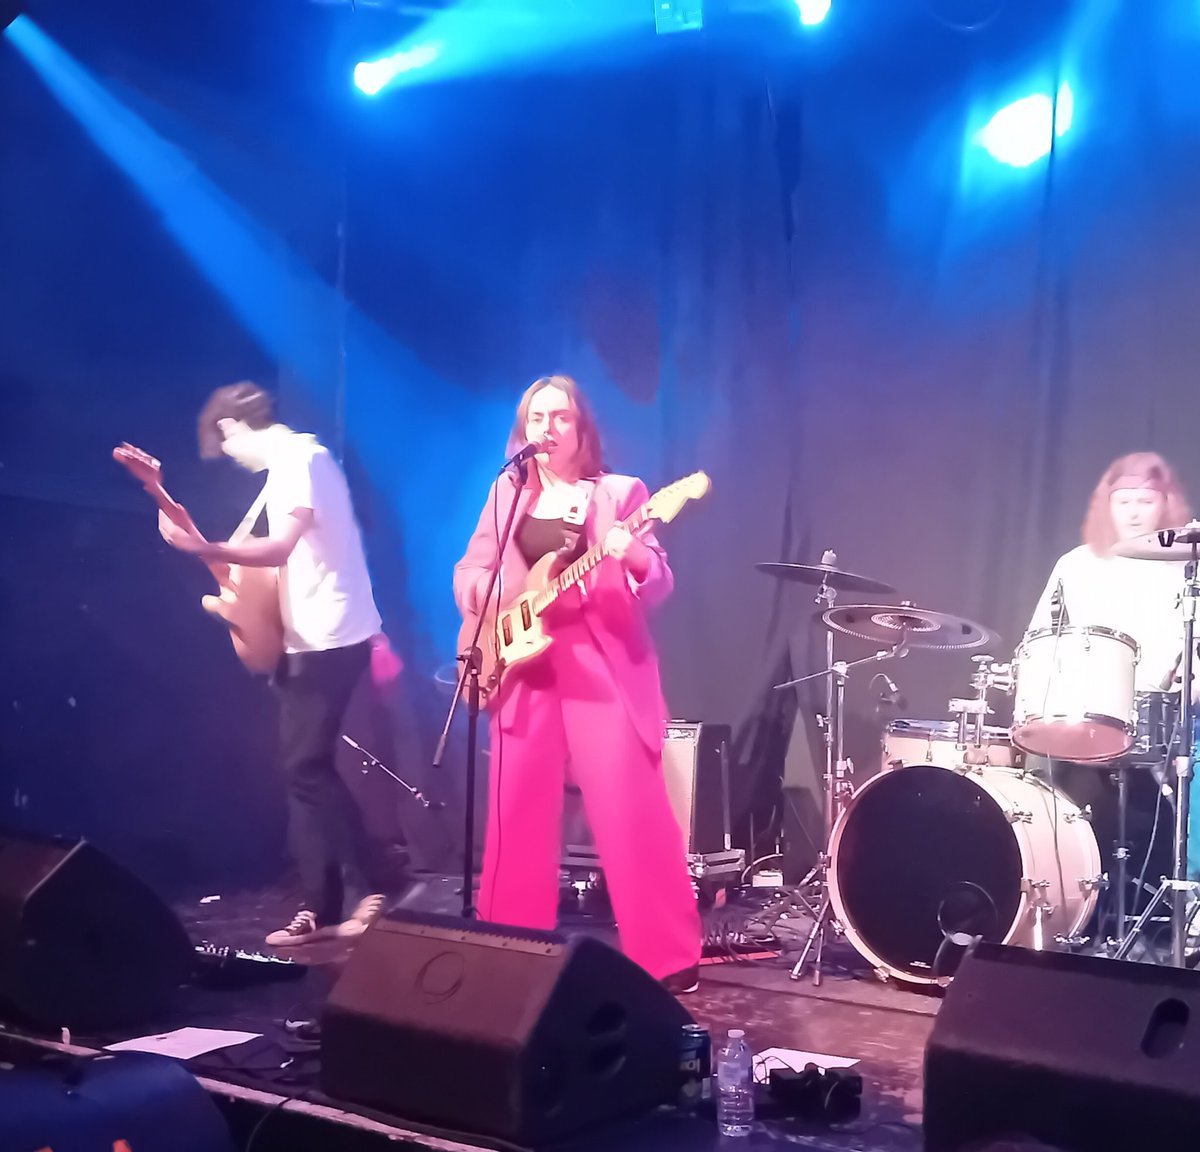 A great, slightly curtailed set from @tillyloumusic set the tone for yesterday's #FestEvol24 at @artsclublpool.